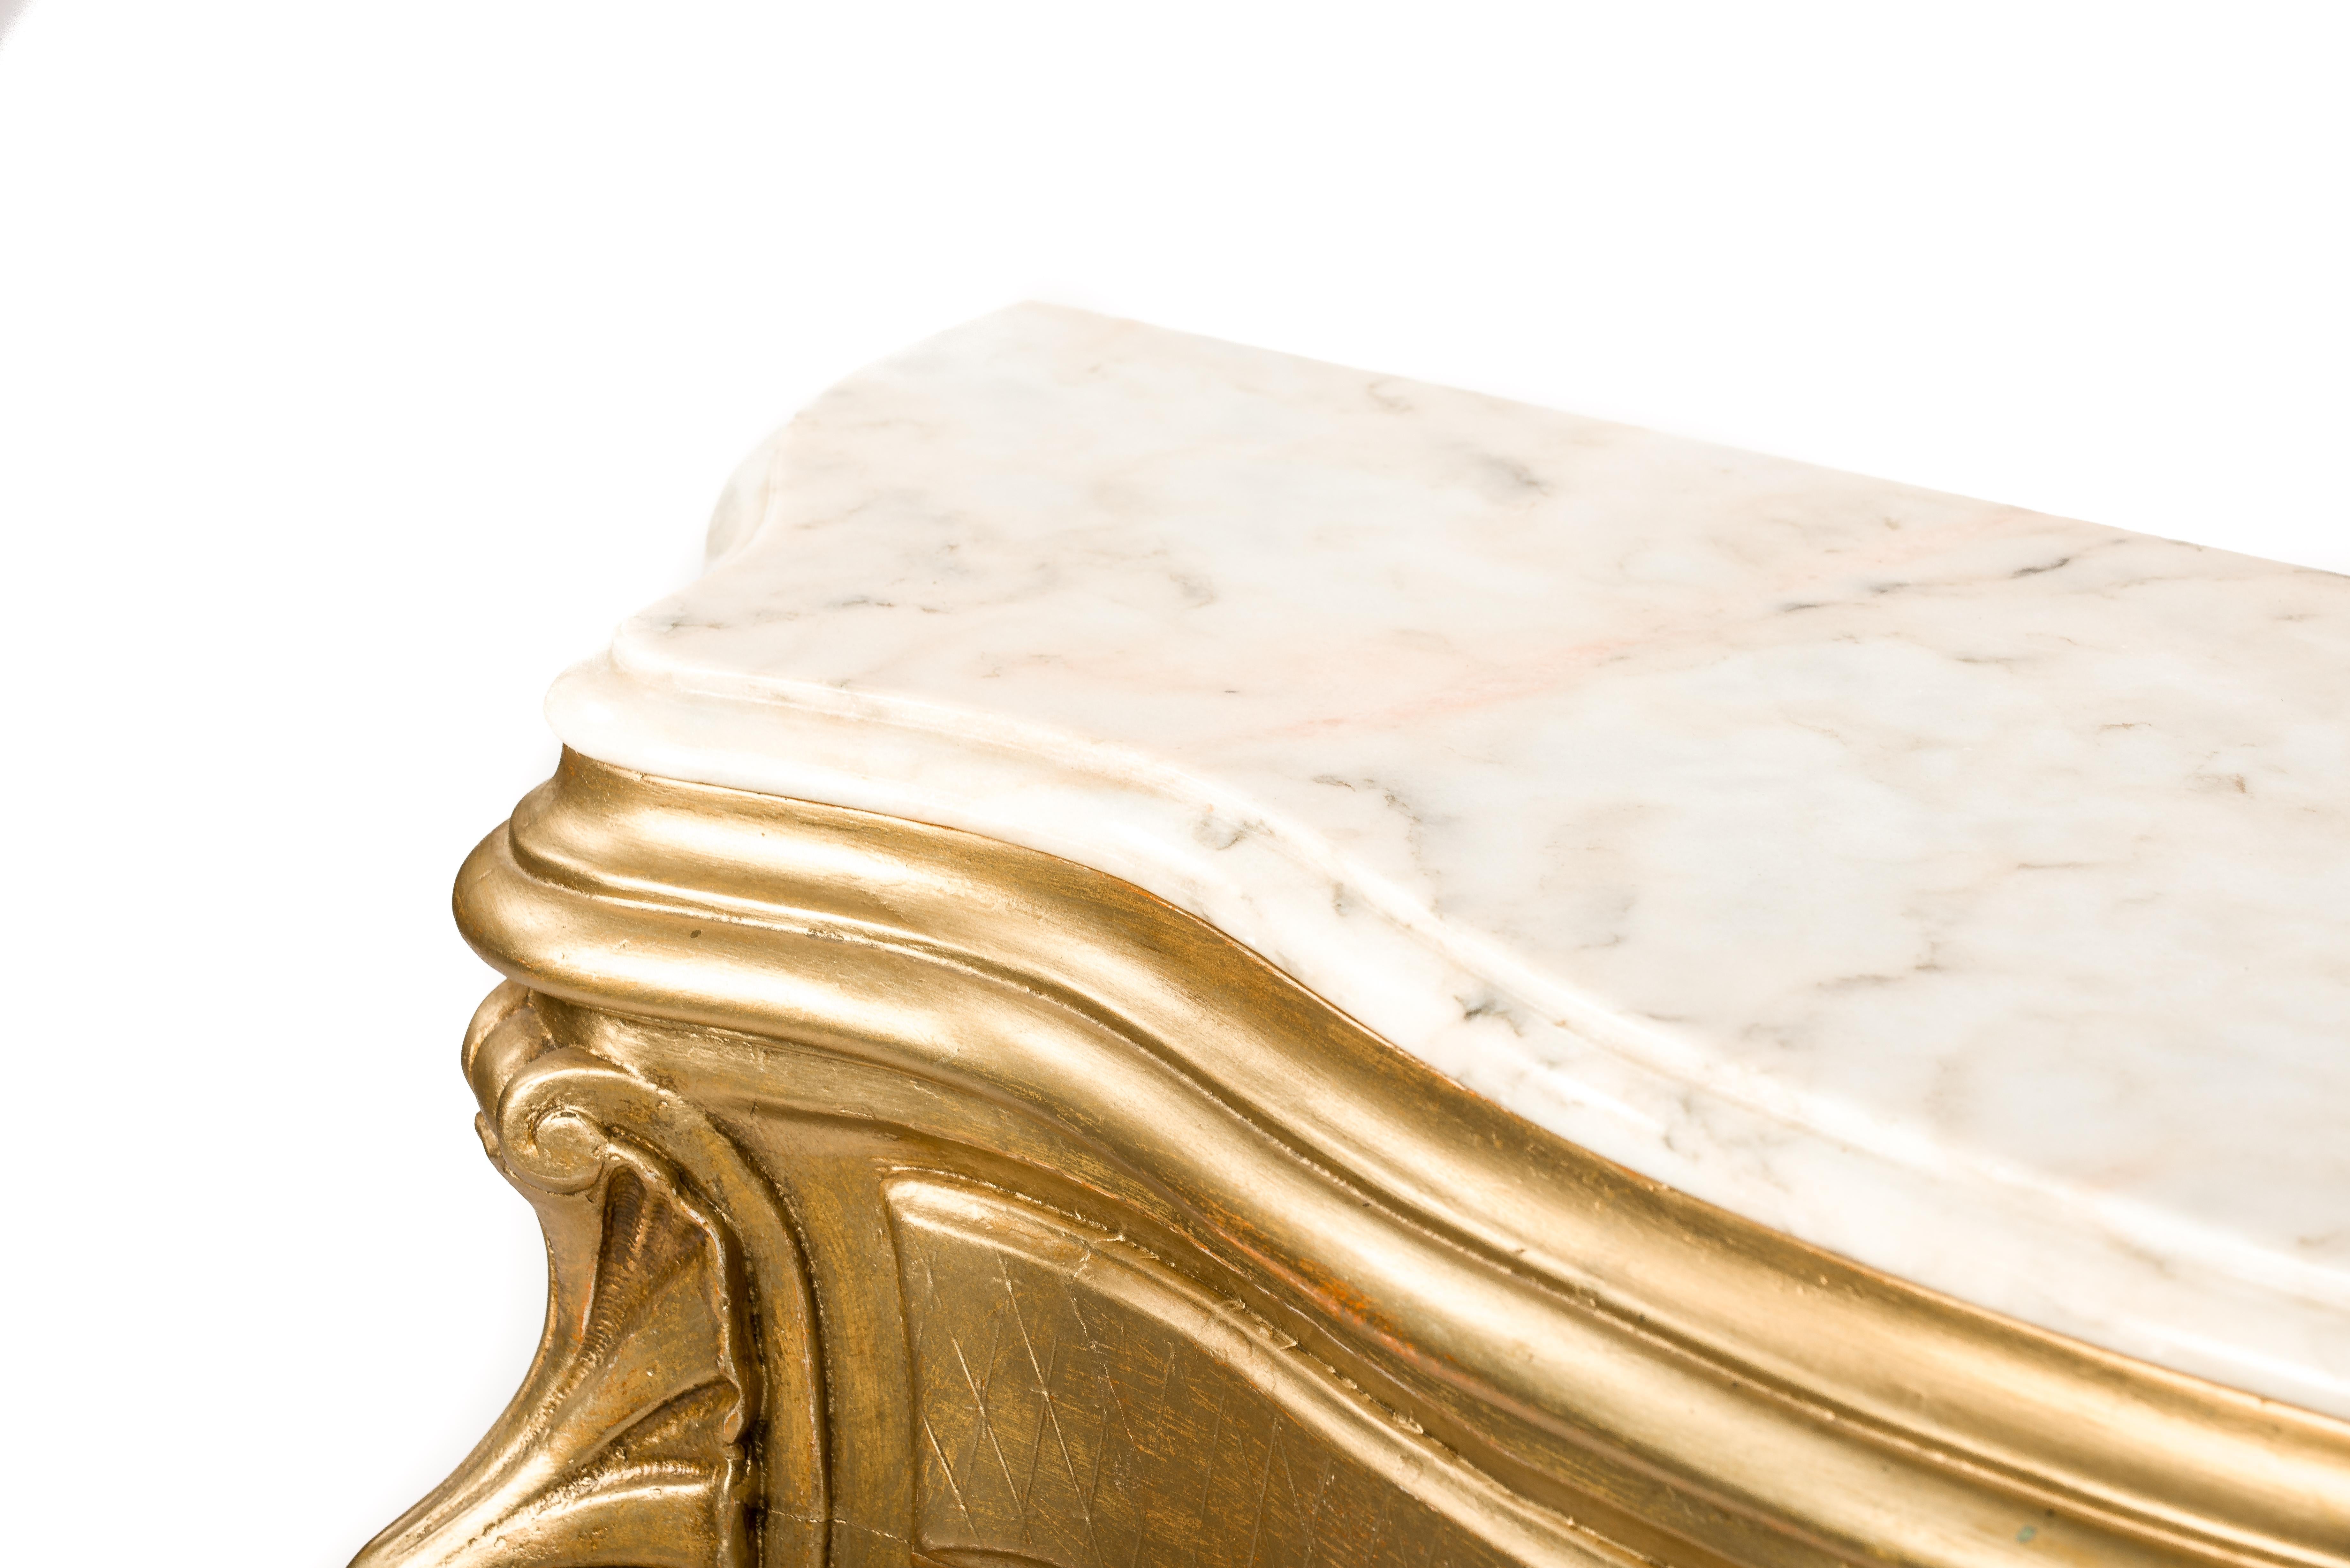 19th Century Antique 19th century French Gold Baroque Console Table,  Bianca Rosa Marble Top For Sale